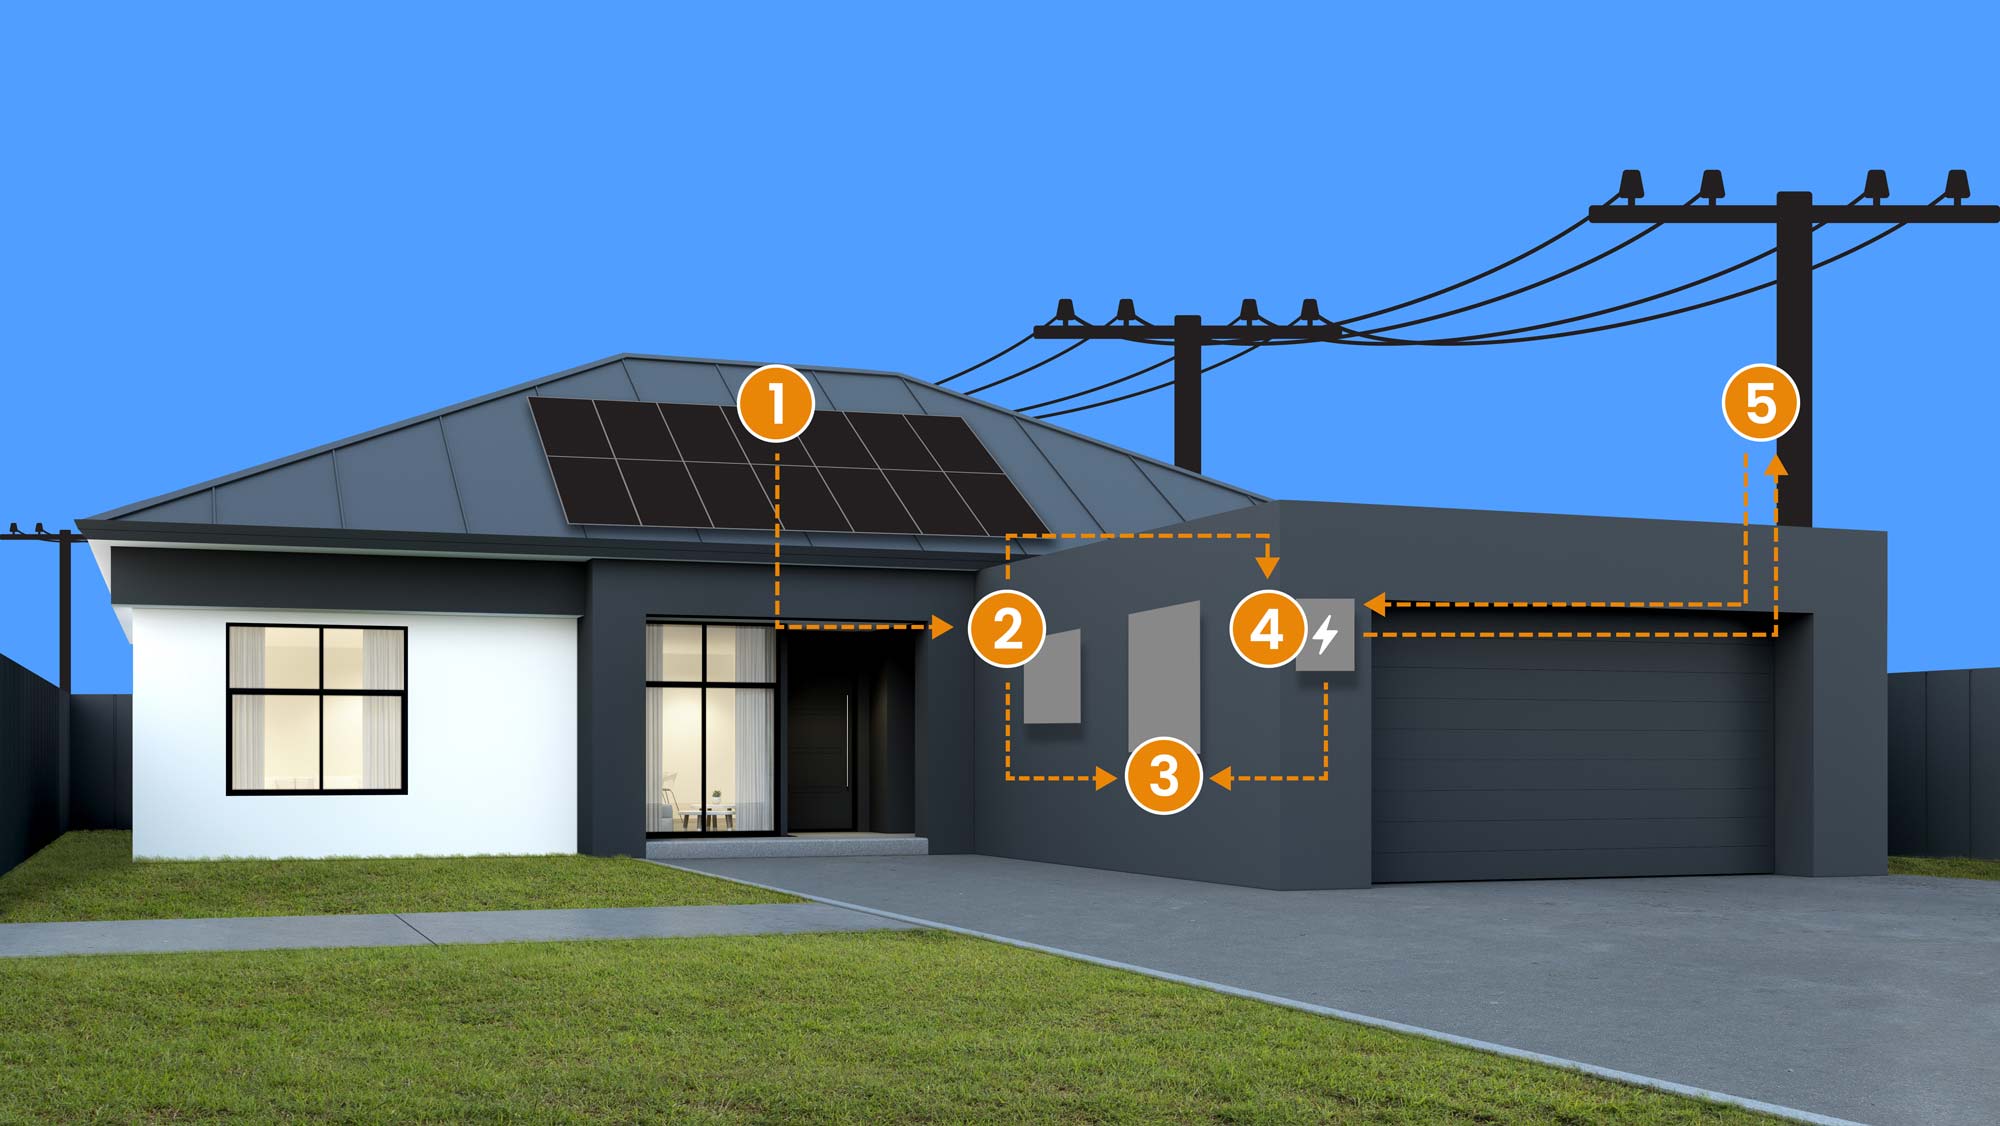 Diagram showing how panels, inverter, battery, meter, and the grid work together to produce solar energy for the home